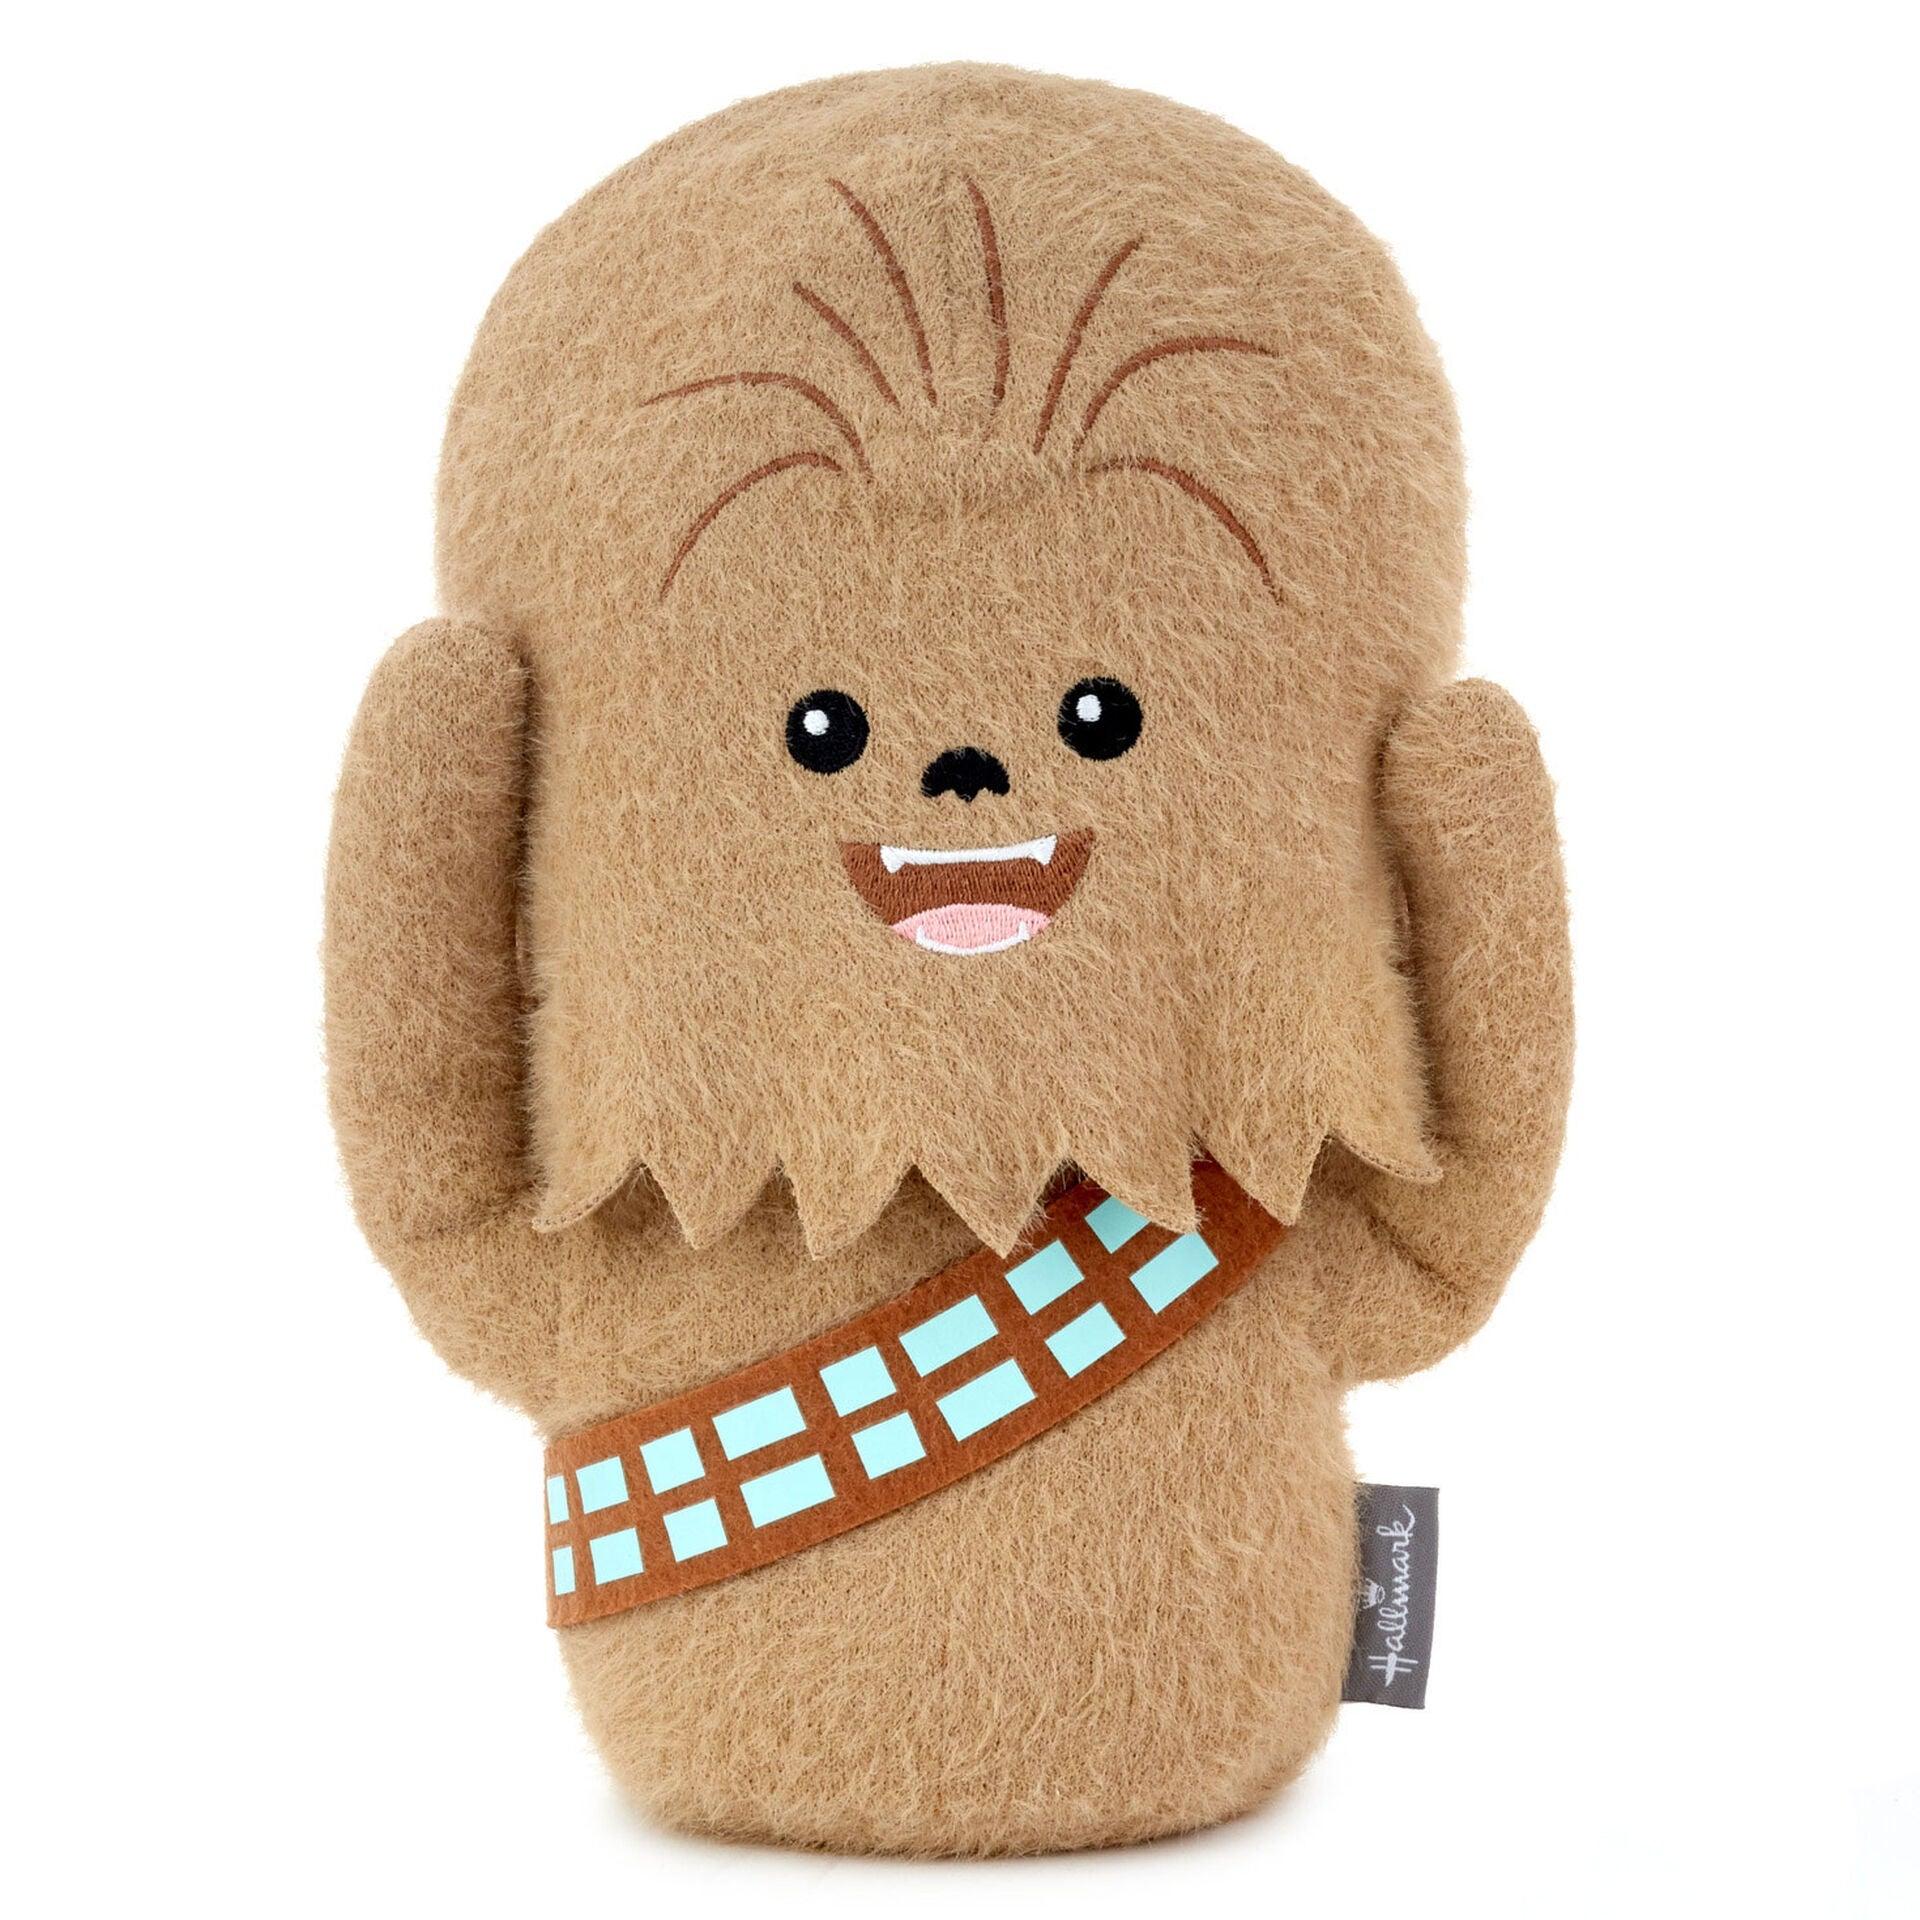 Star Wars™ Chewbacca™ Plush Weighted Bookend